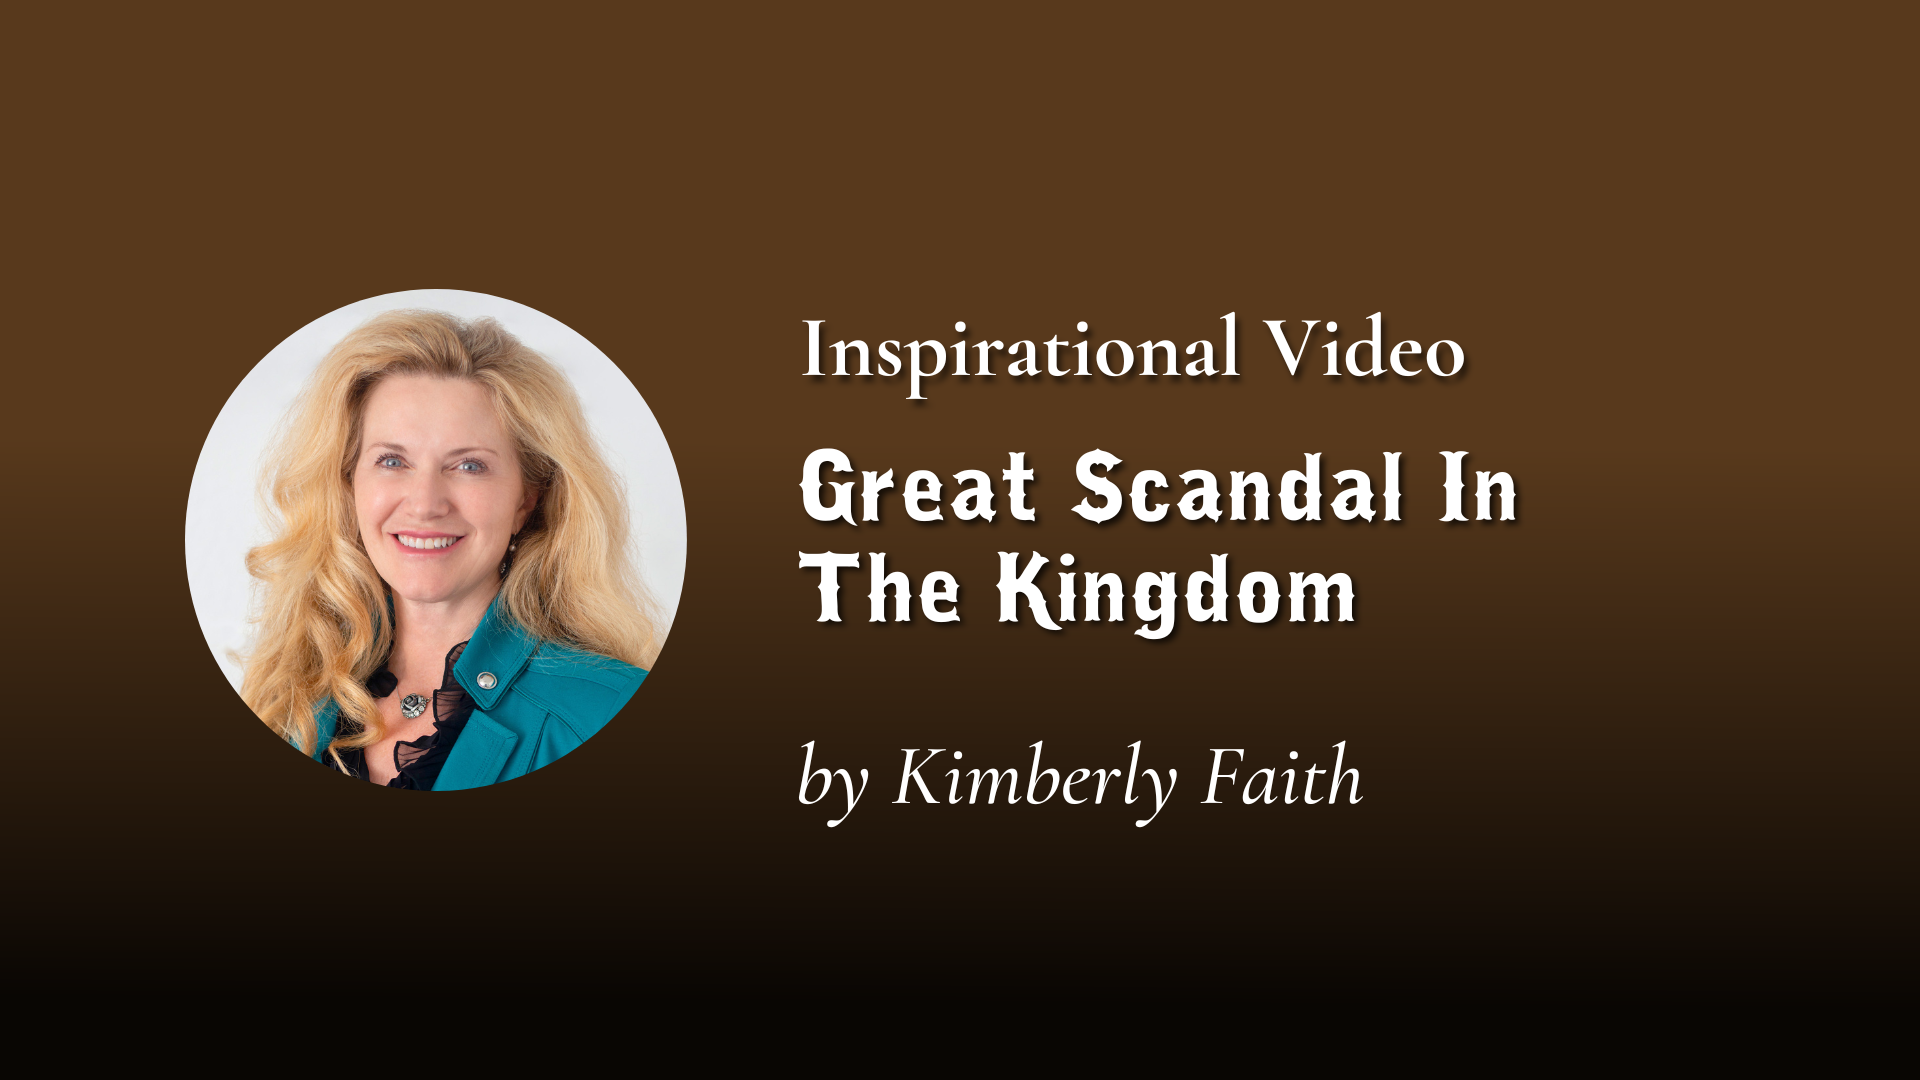 Great Scandal In The Kingdom